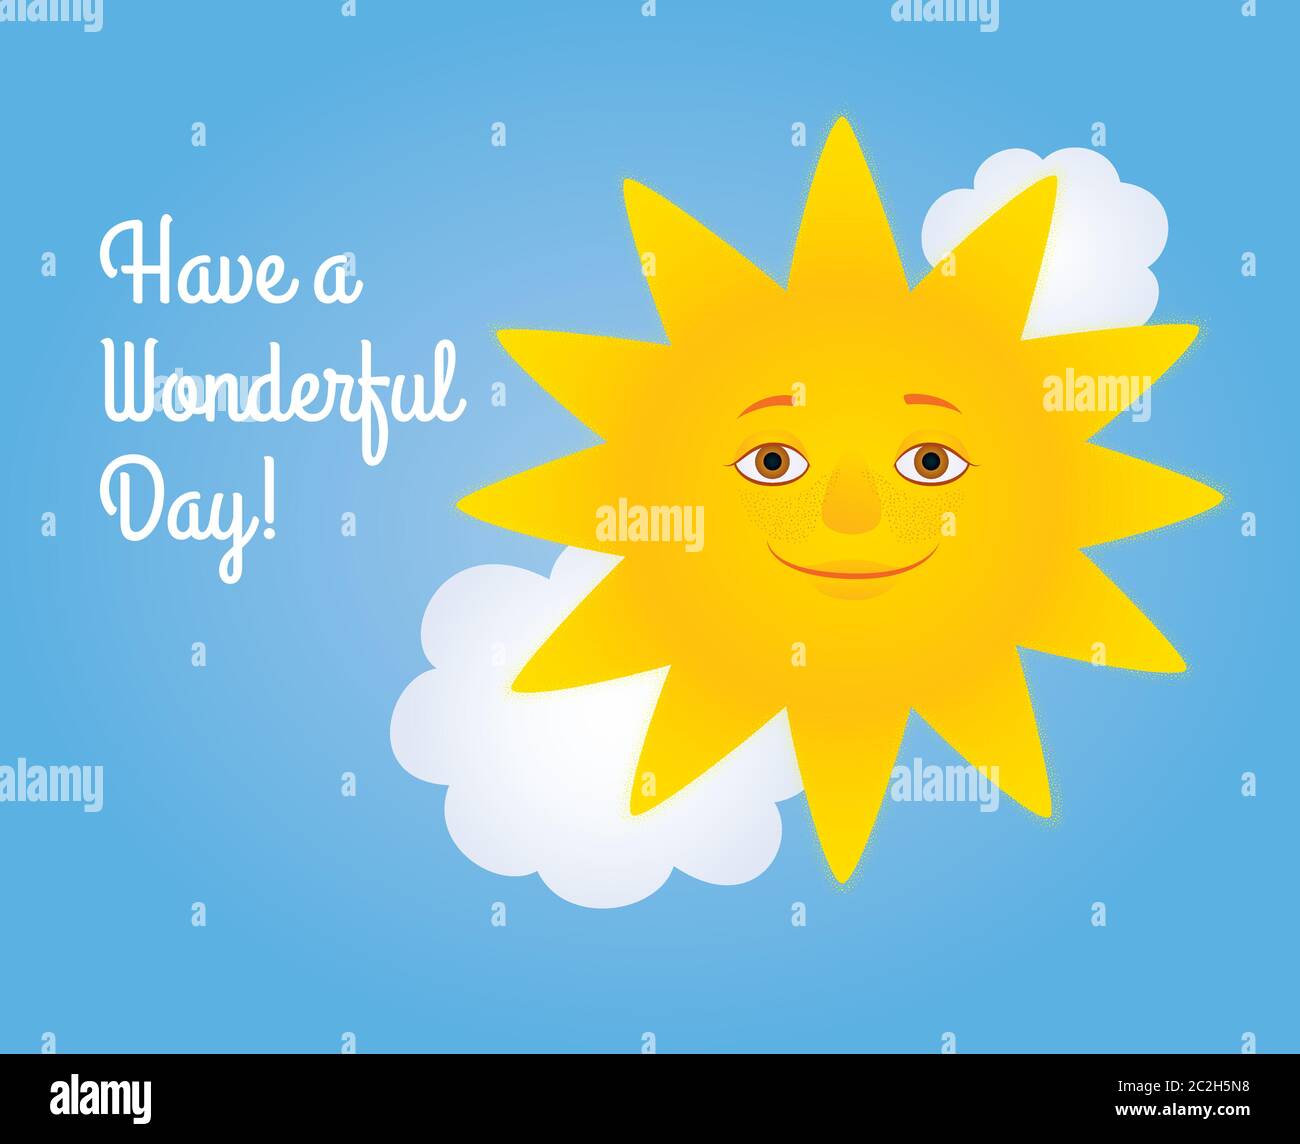 Vector cartoon illustration of a smiling sun and white clouds in a blue sky. Greeting text 'Have a wonderful day'. Horizontal format, cursive font. Stock Vector